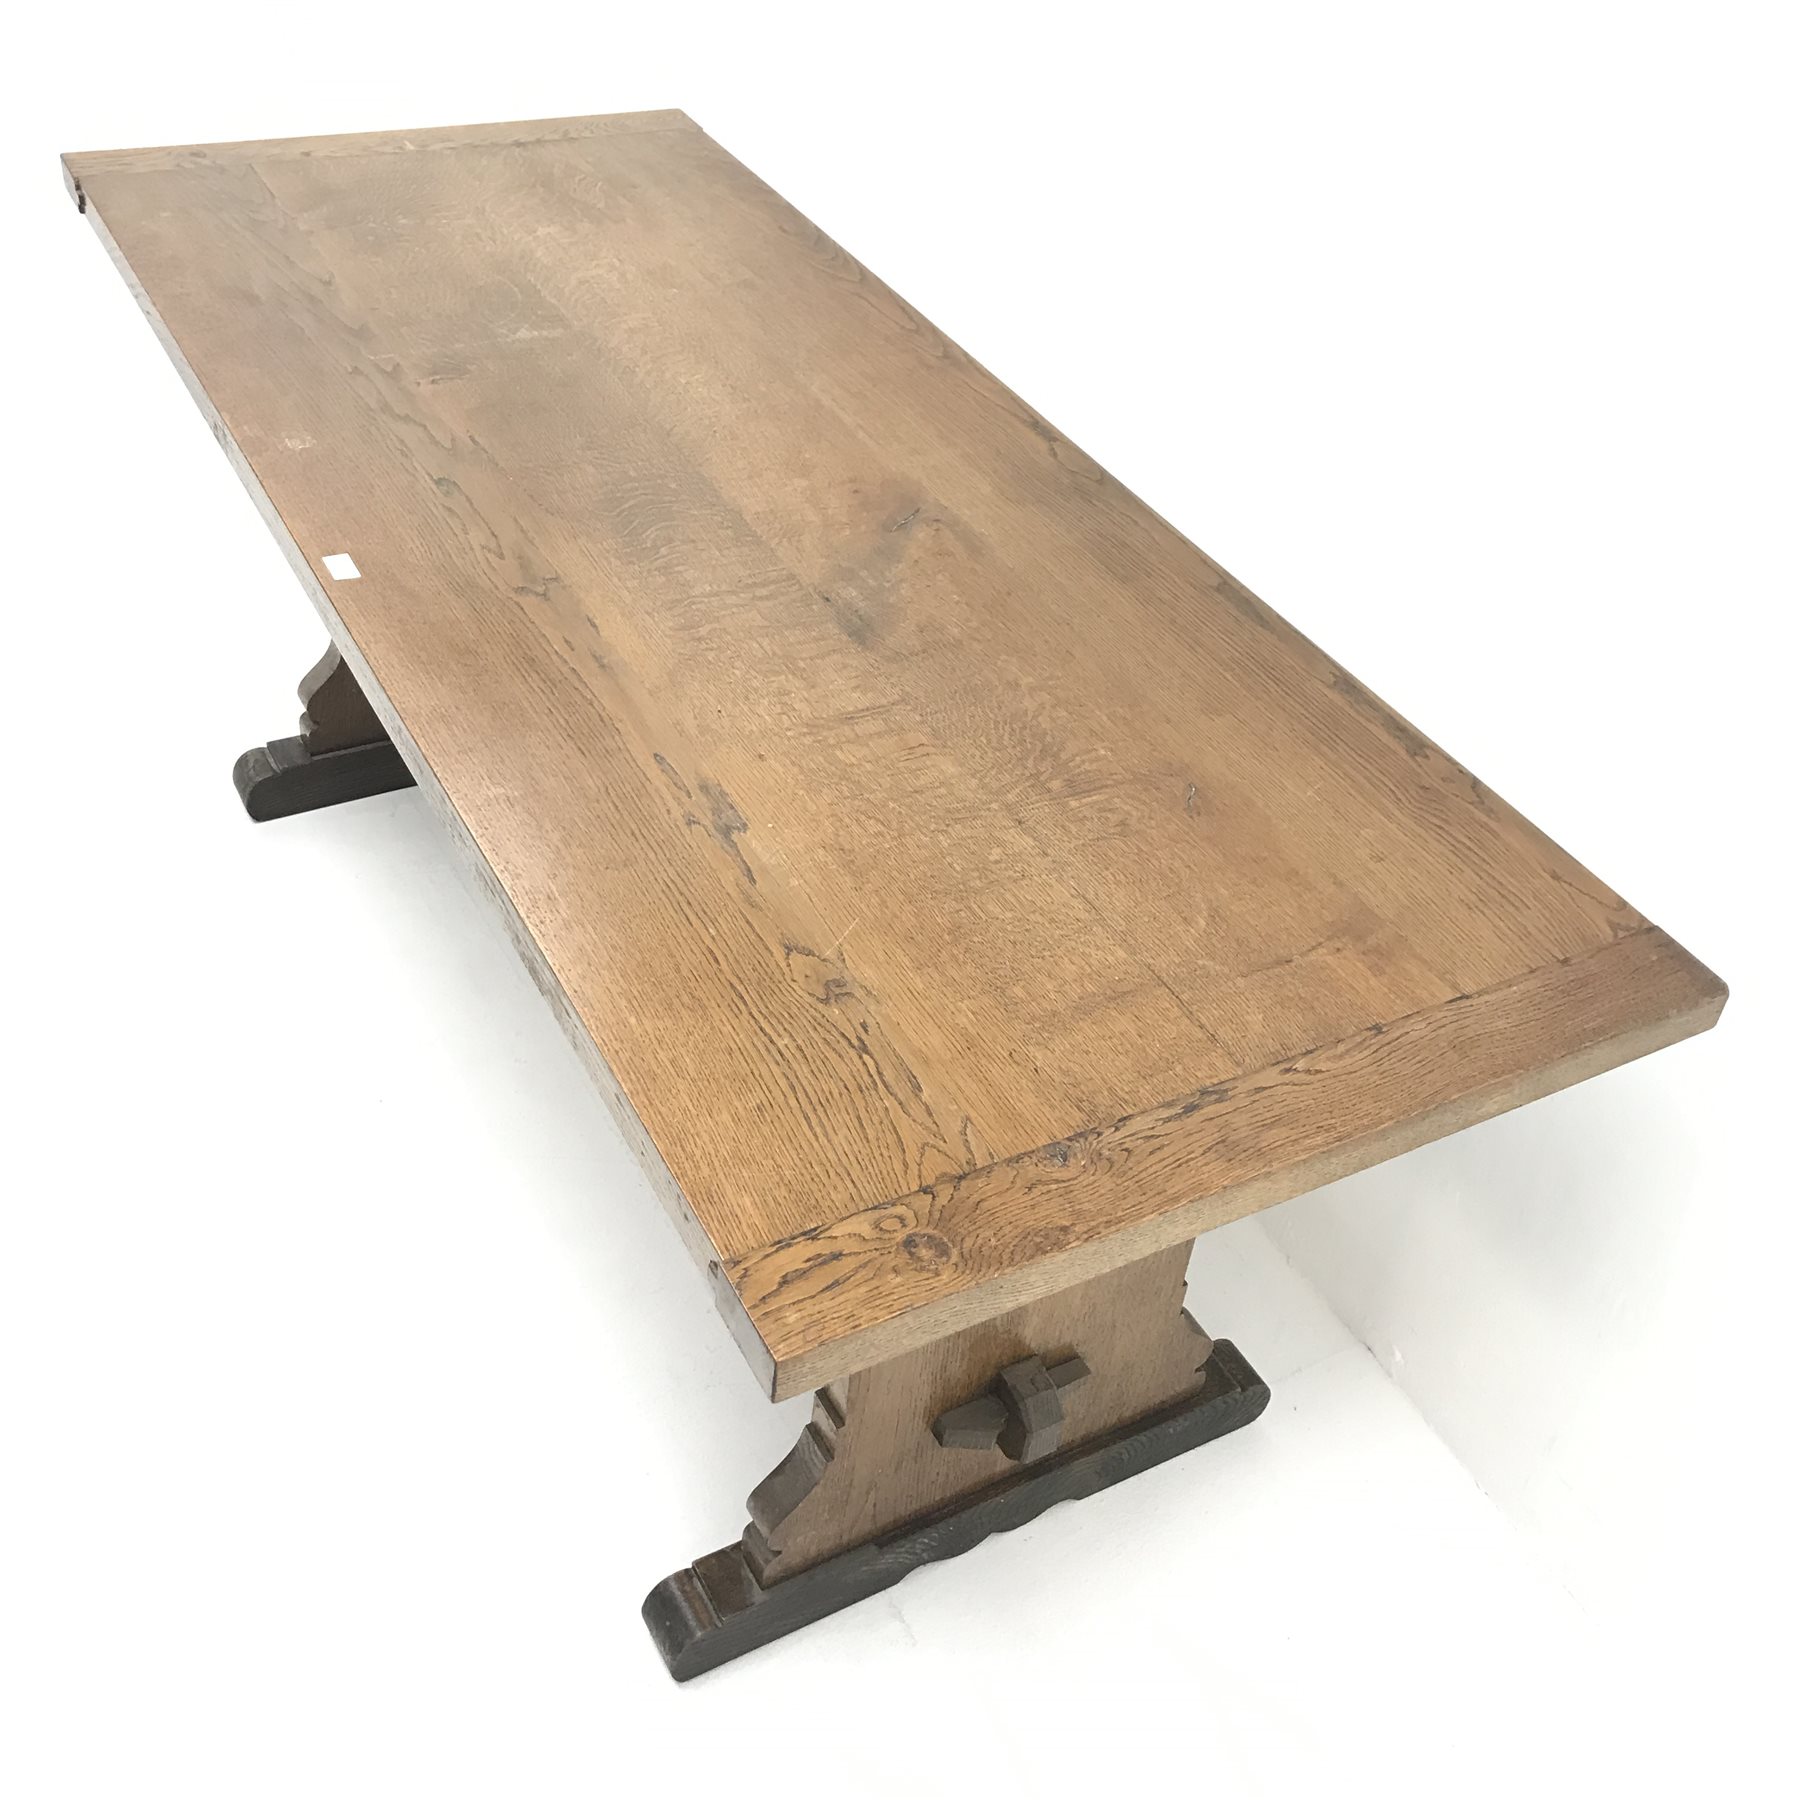 20th century oak refectory table, shaped solid end supports joined by single undertier, sledge feet, - Image 5 of 8